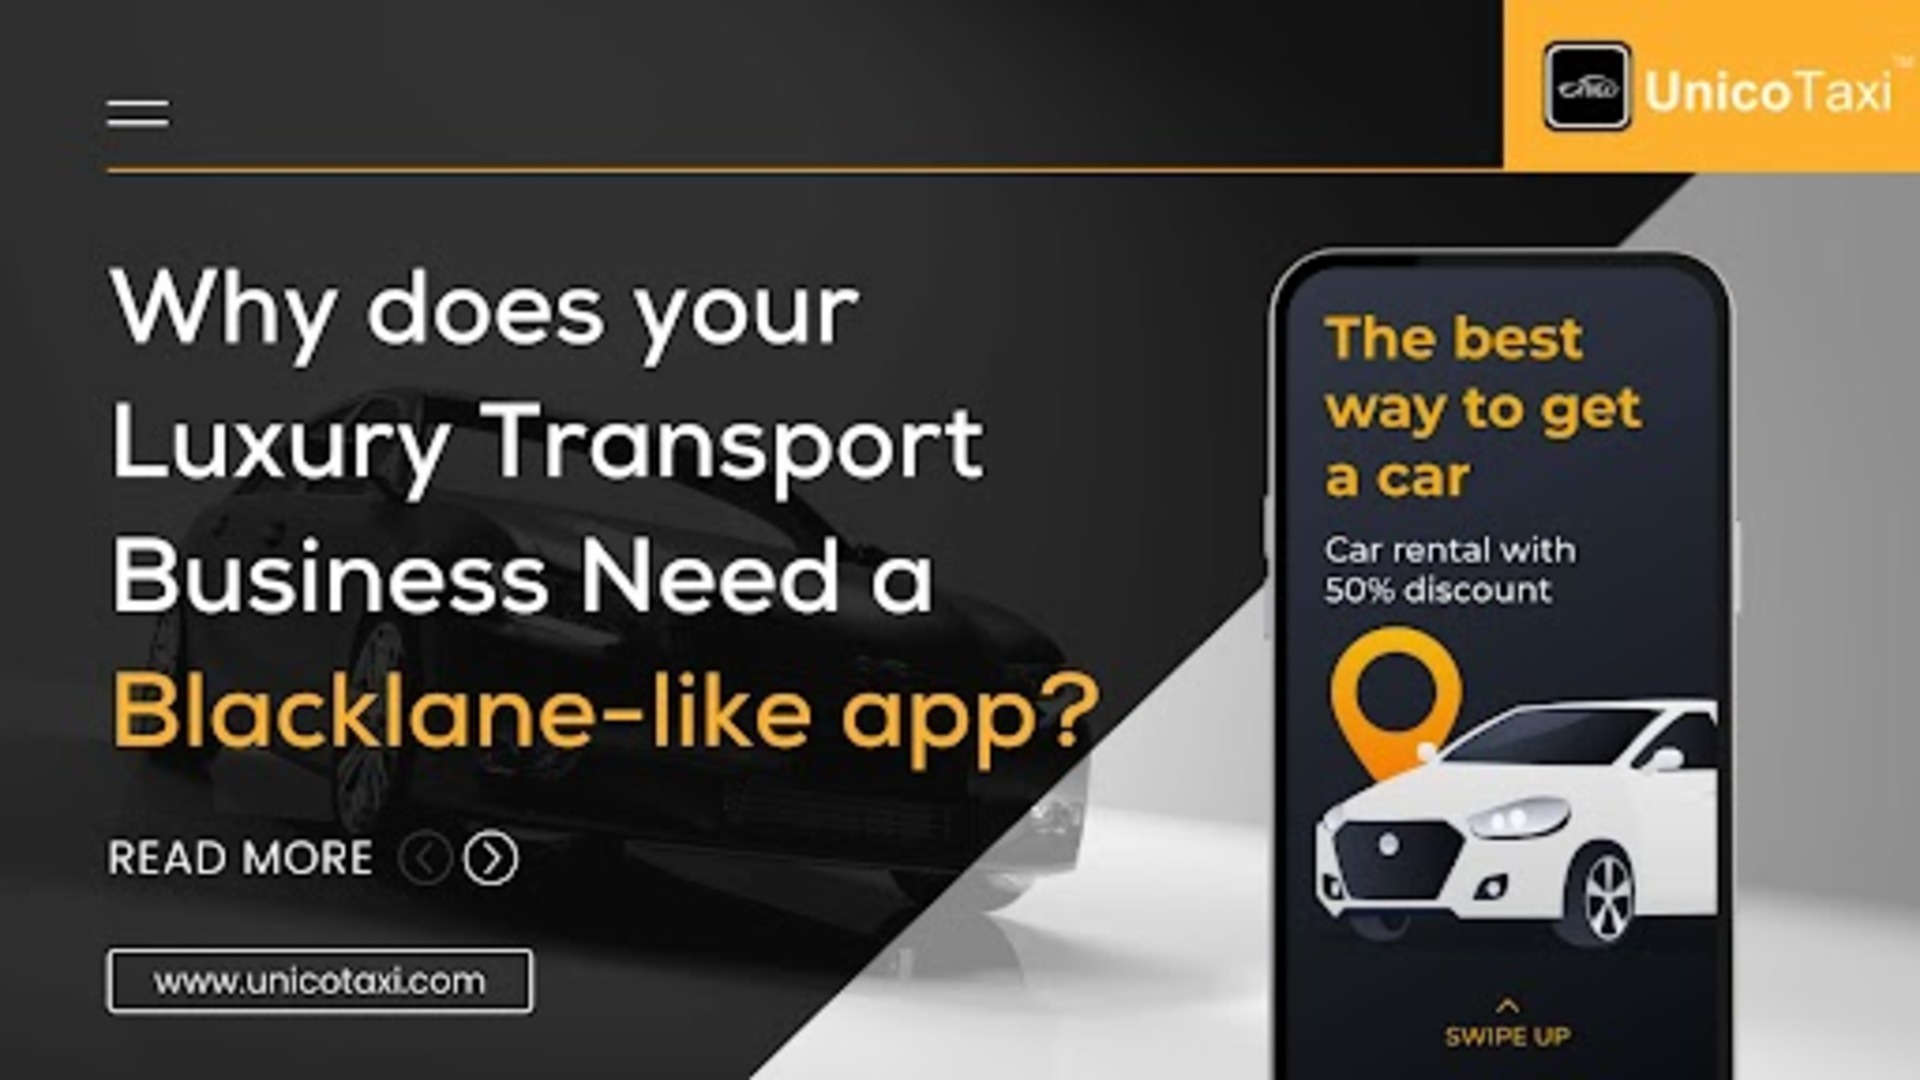 Why does your Luxury Transport Business Need a Blacklane-like App?